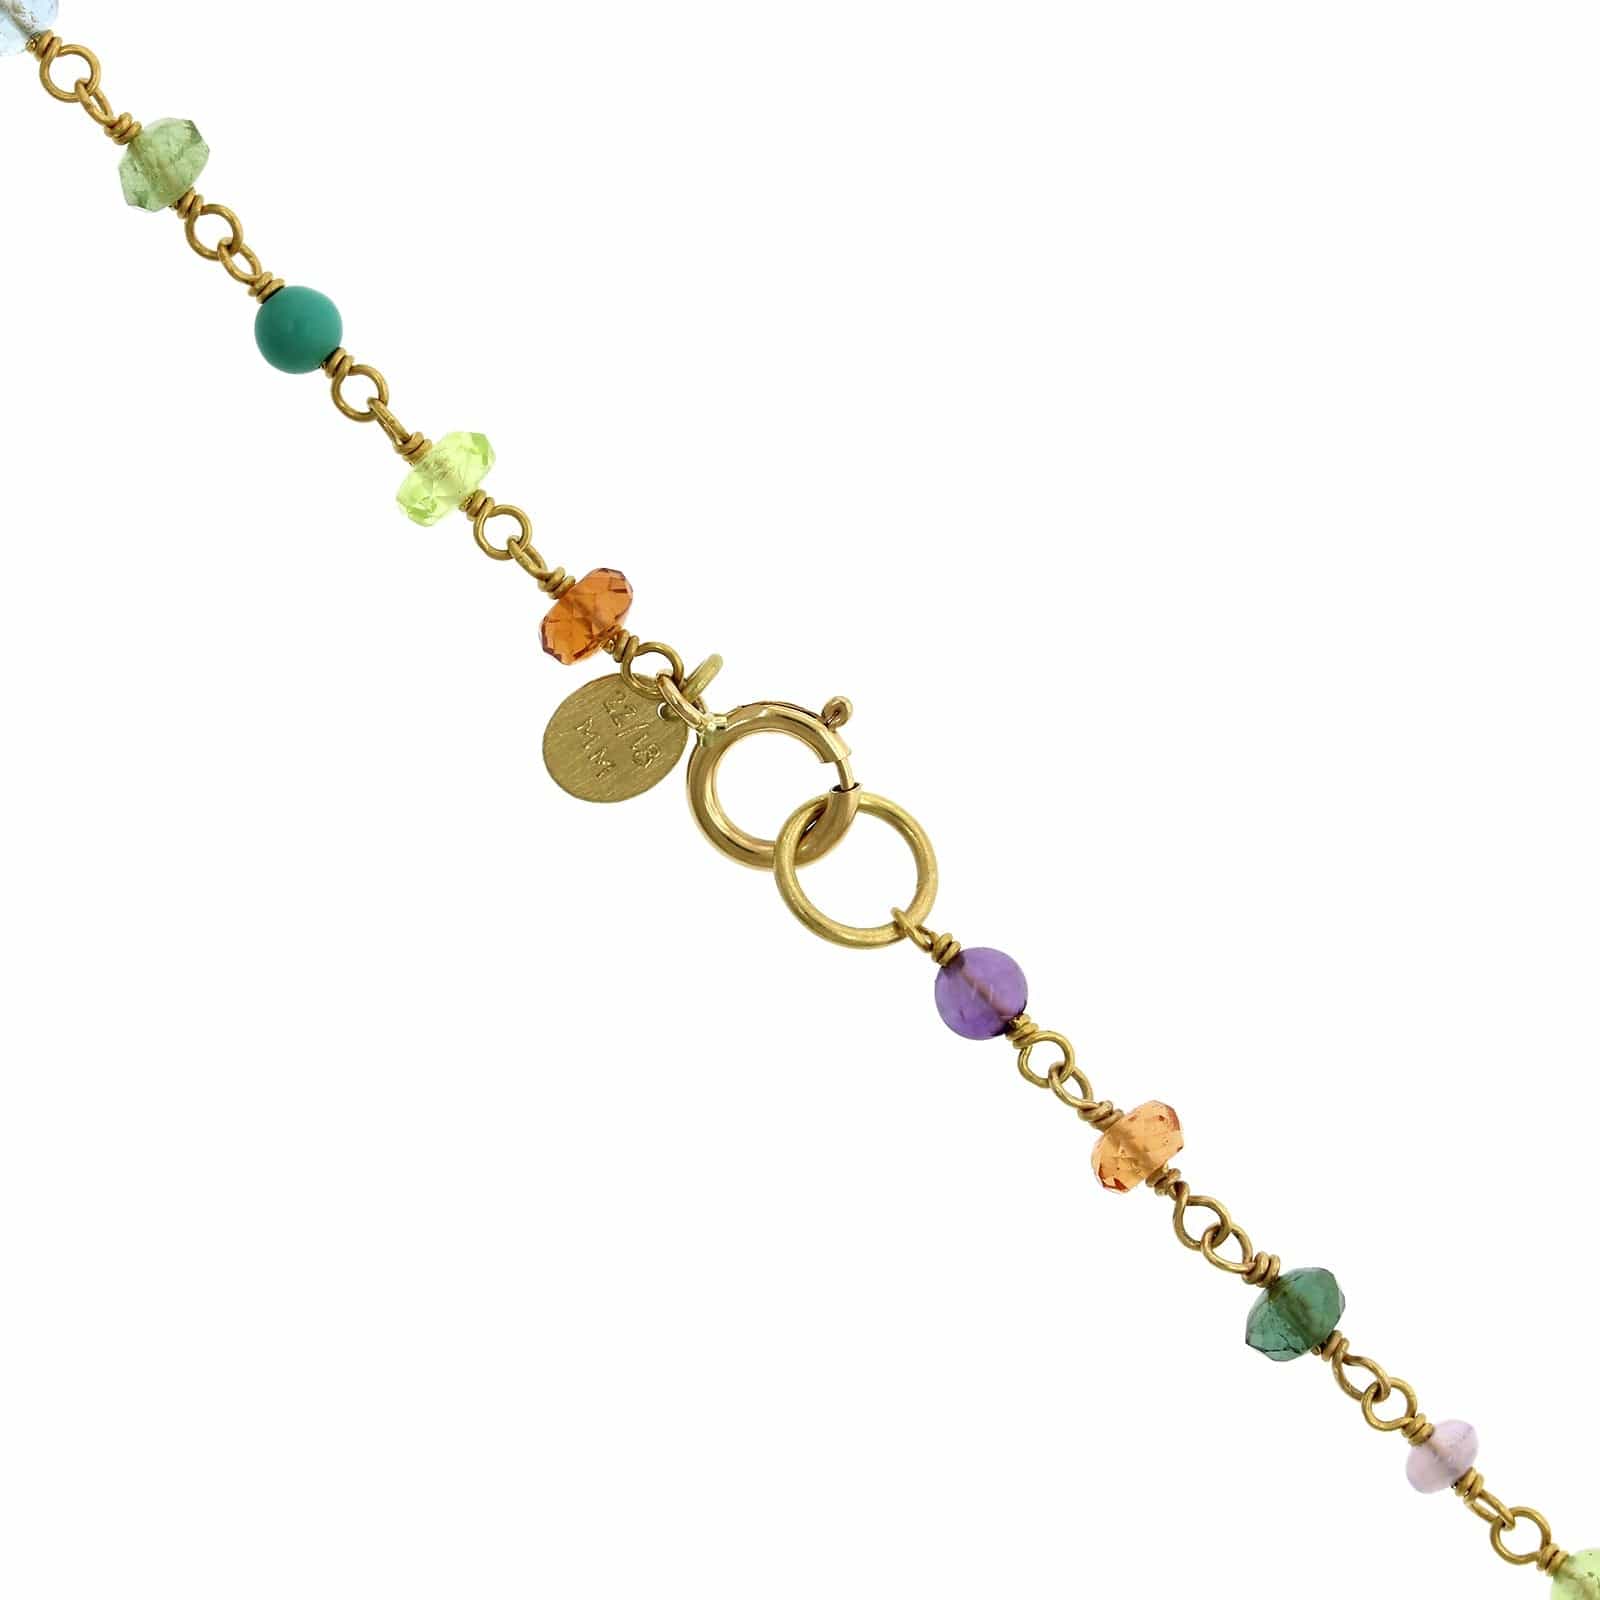 22K Yellow Gold Multi Gem Buoy Necklace, 22k yellow gold Long's Jewelers